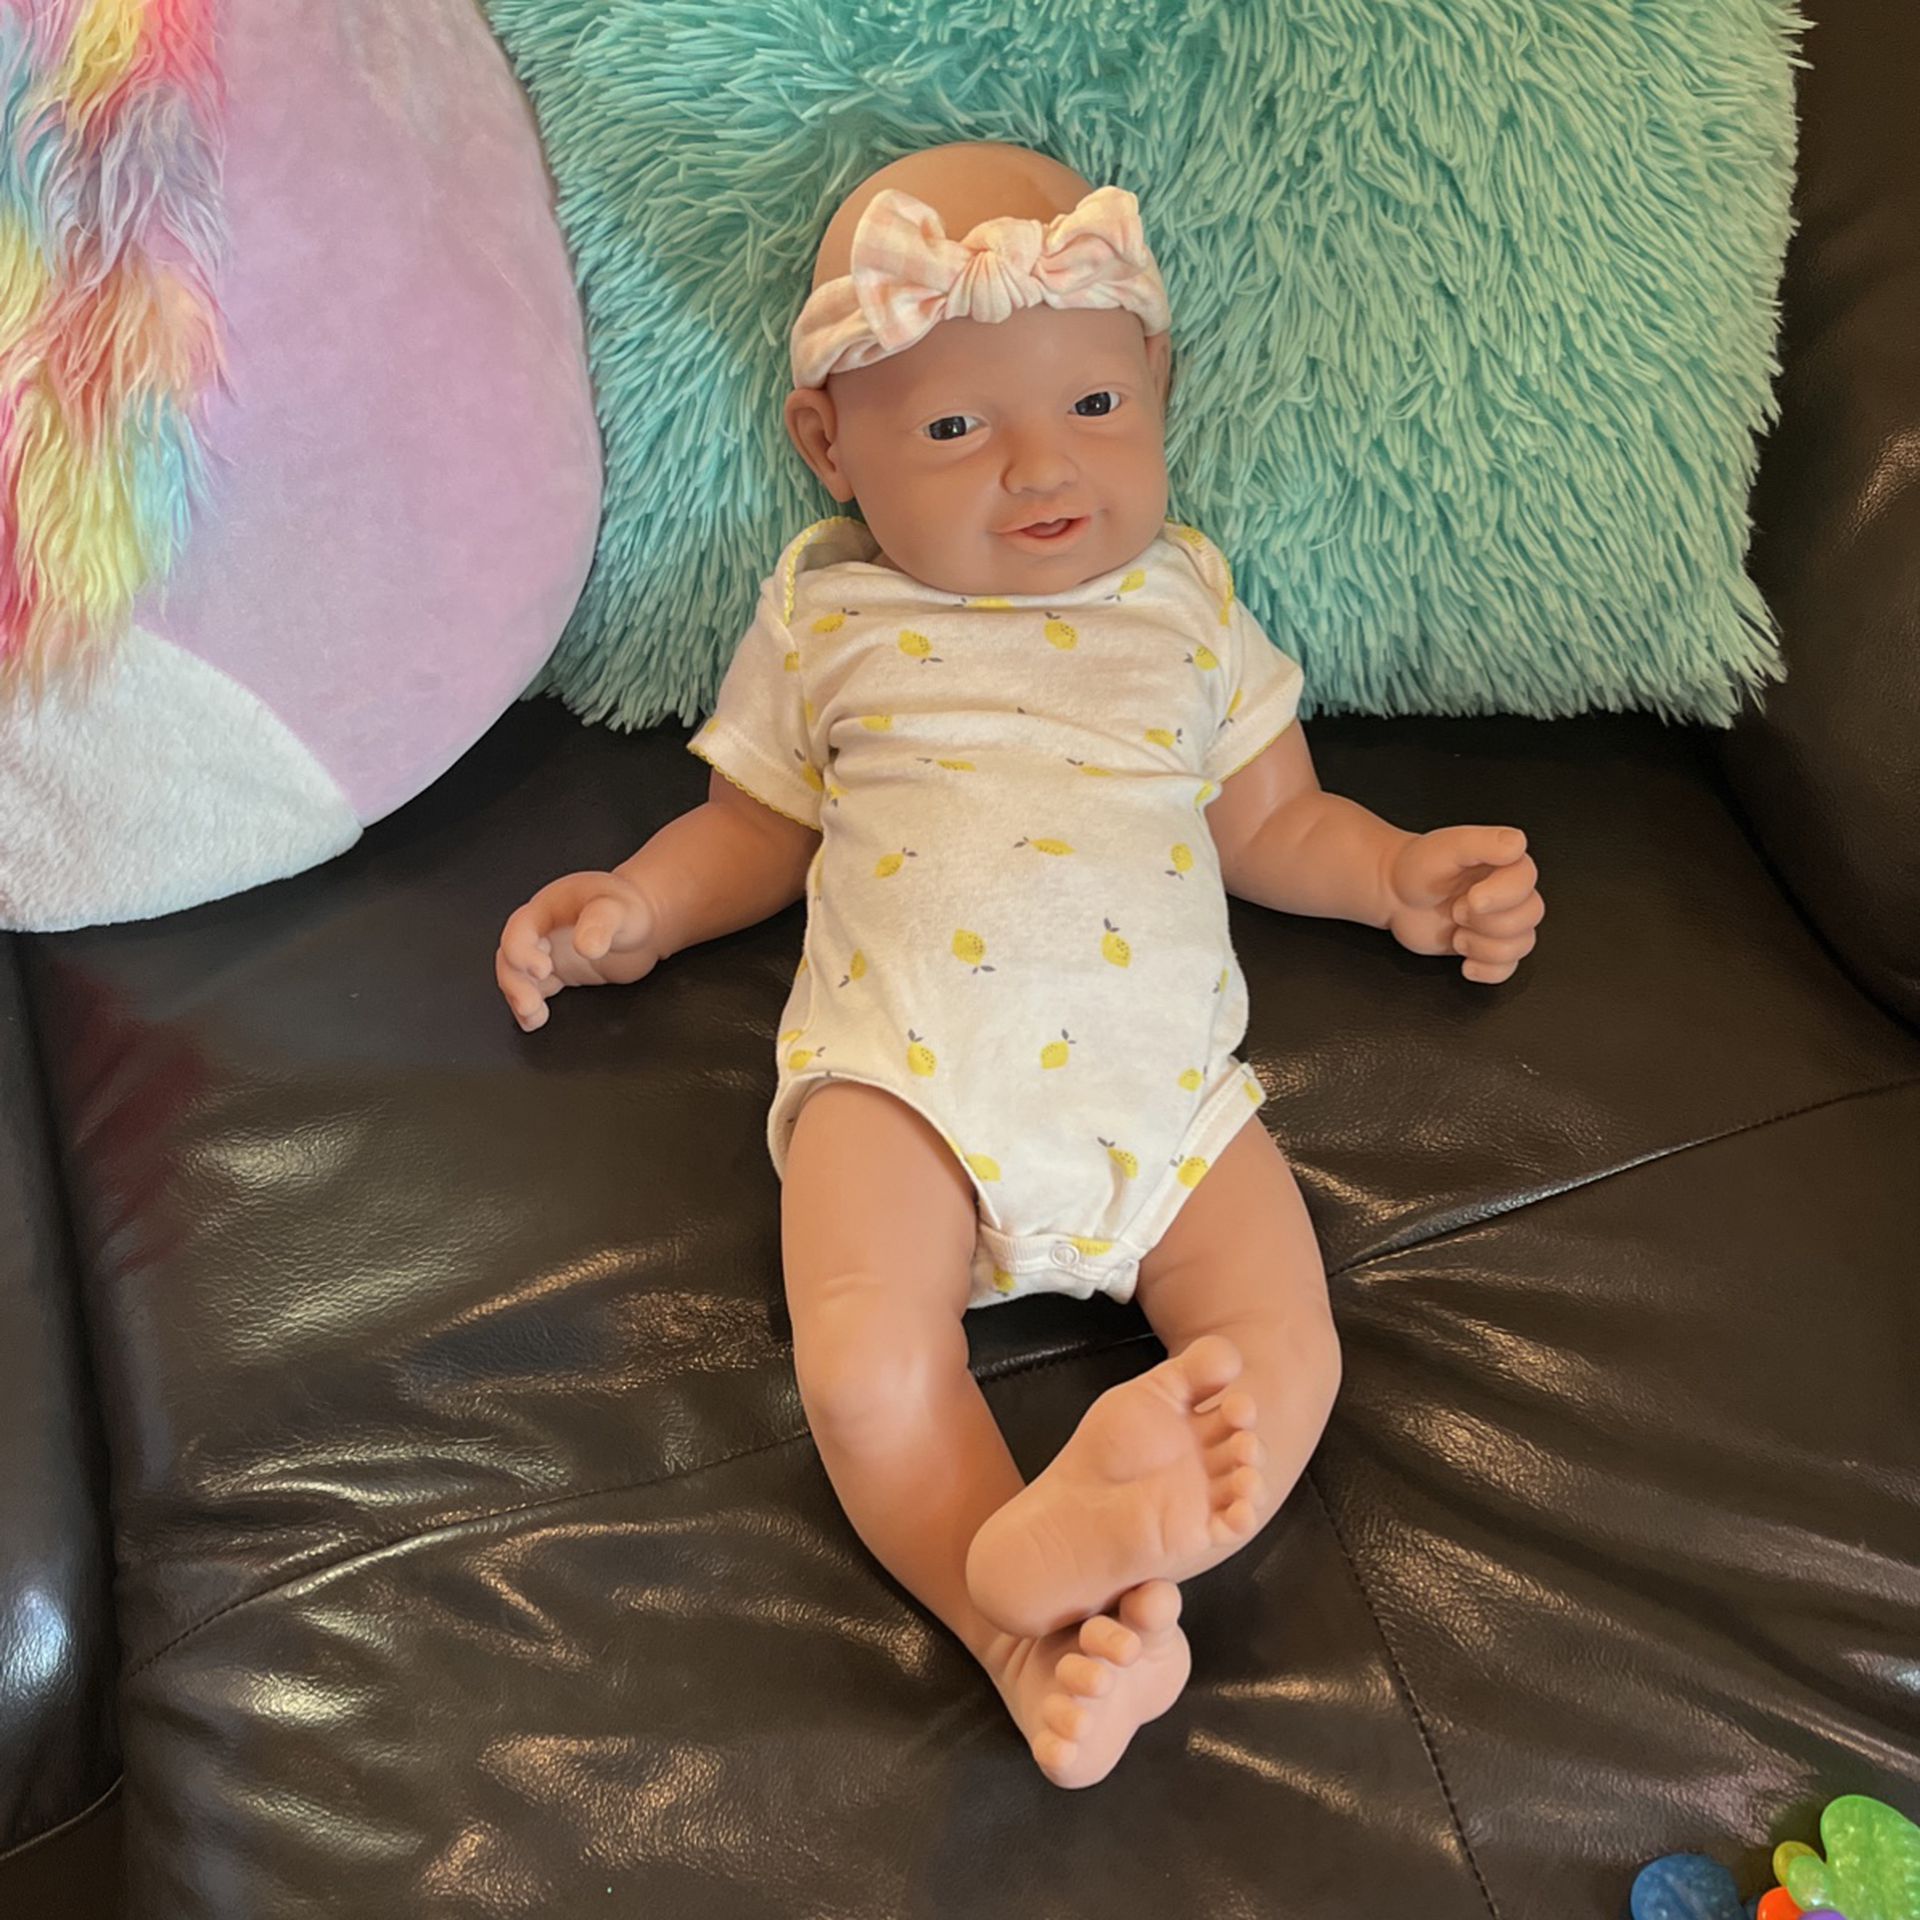 Vollence 23 inch Full Body Silicone Baby Dolls That Look Real,Not Vinyl Dolls,Real Full Silicone Baby Doll,Lifelike Newborn Baby Doll - Girl